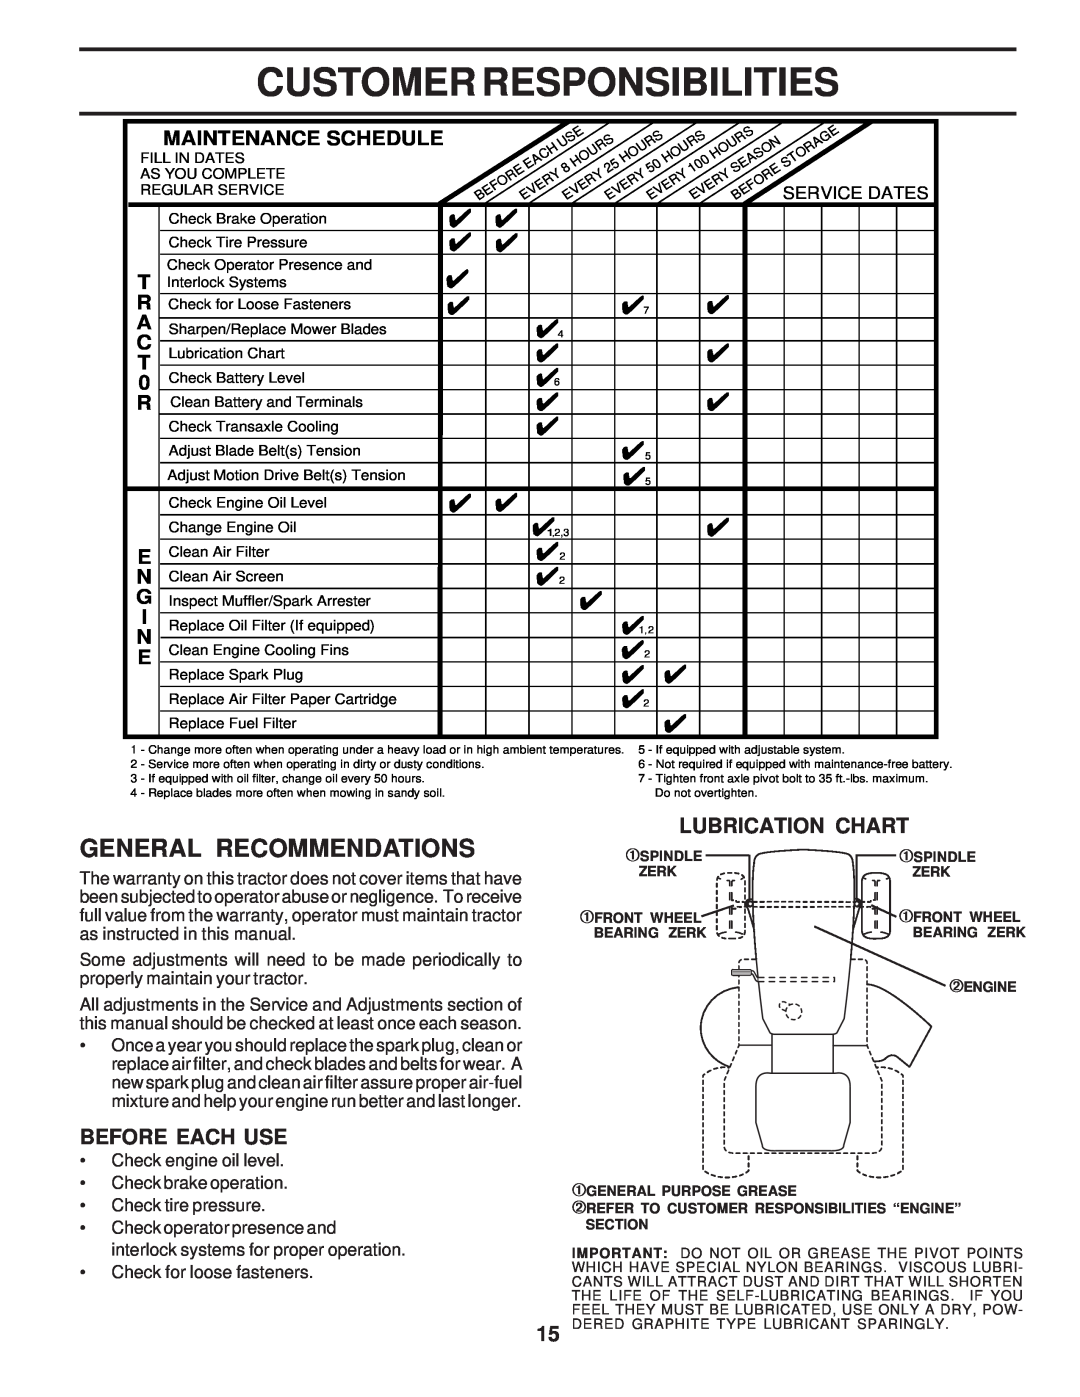 Poulan 173284, PPR17H42STC Customer Responsibilities, General Recommendations, ¿Lubrication Chart, Before Each Use 